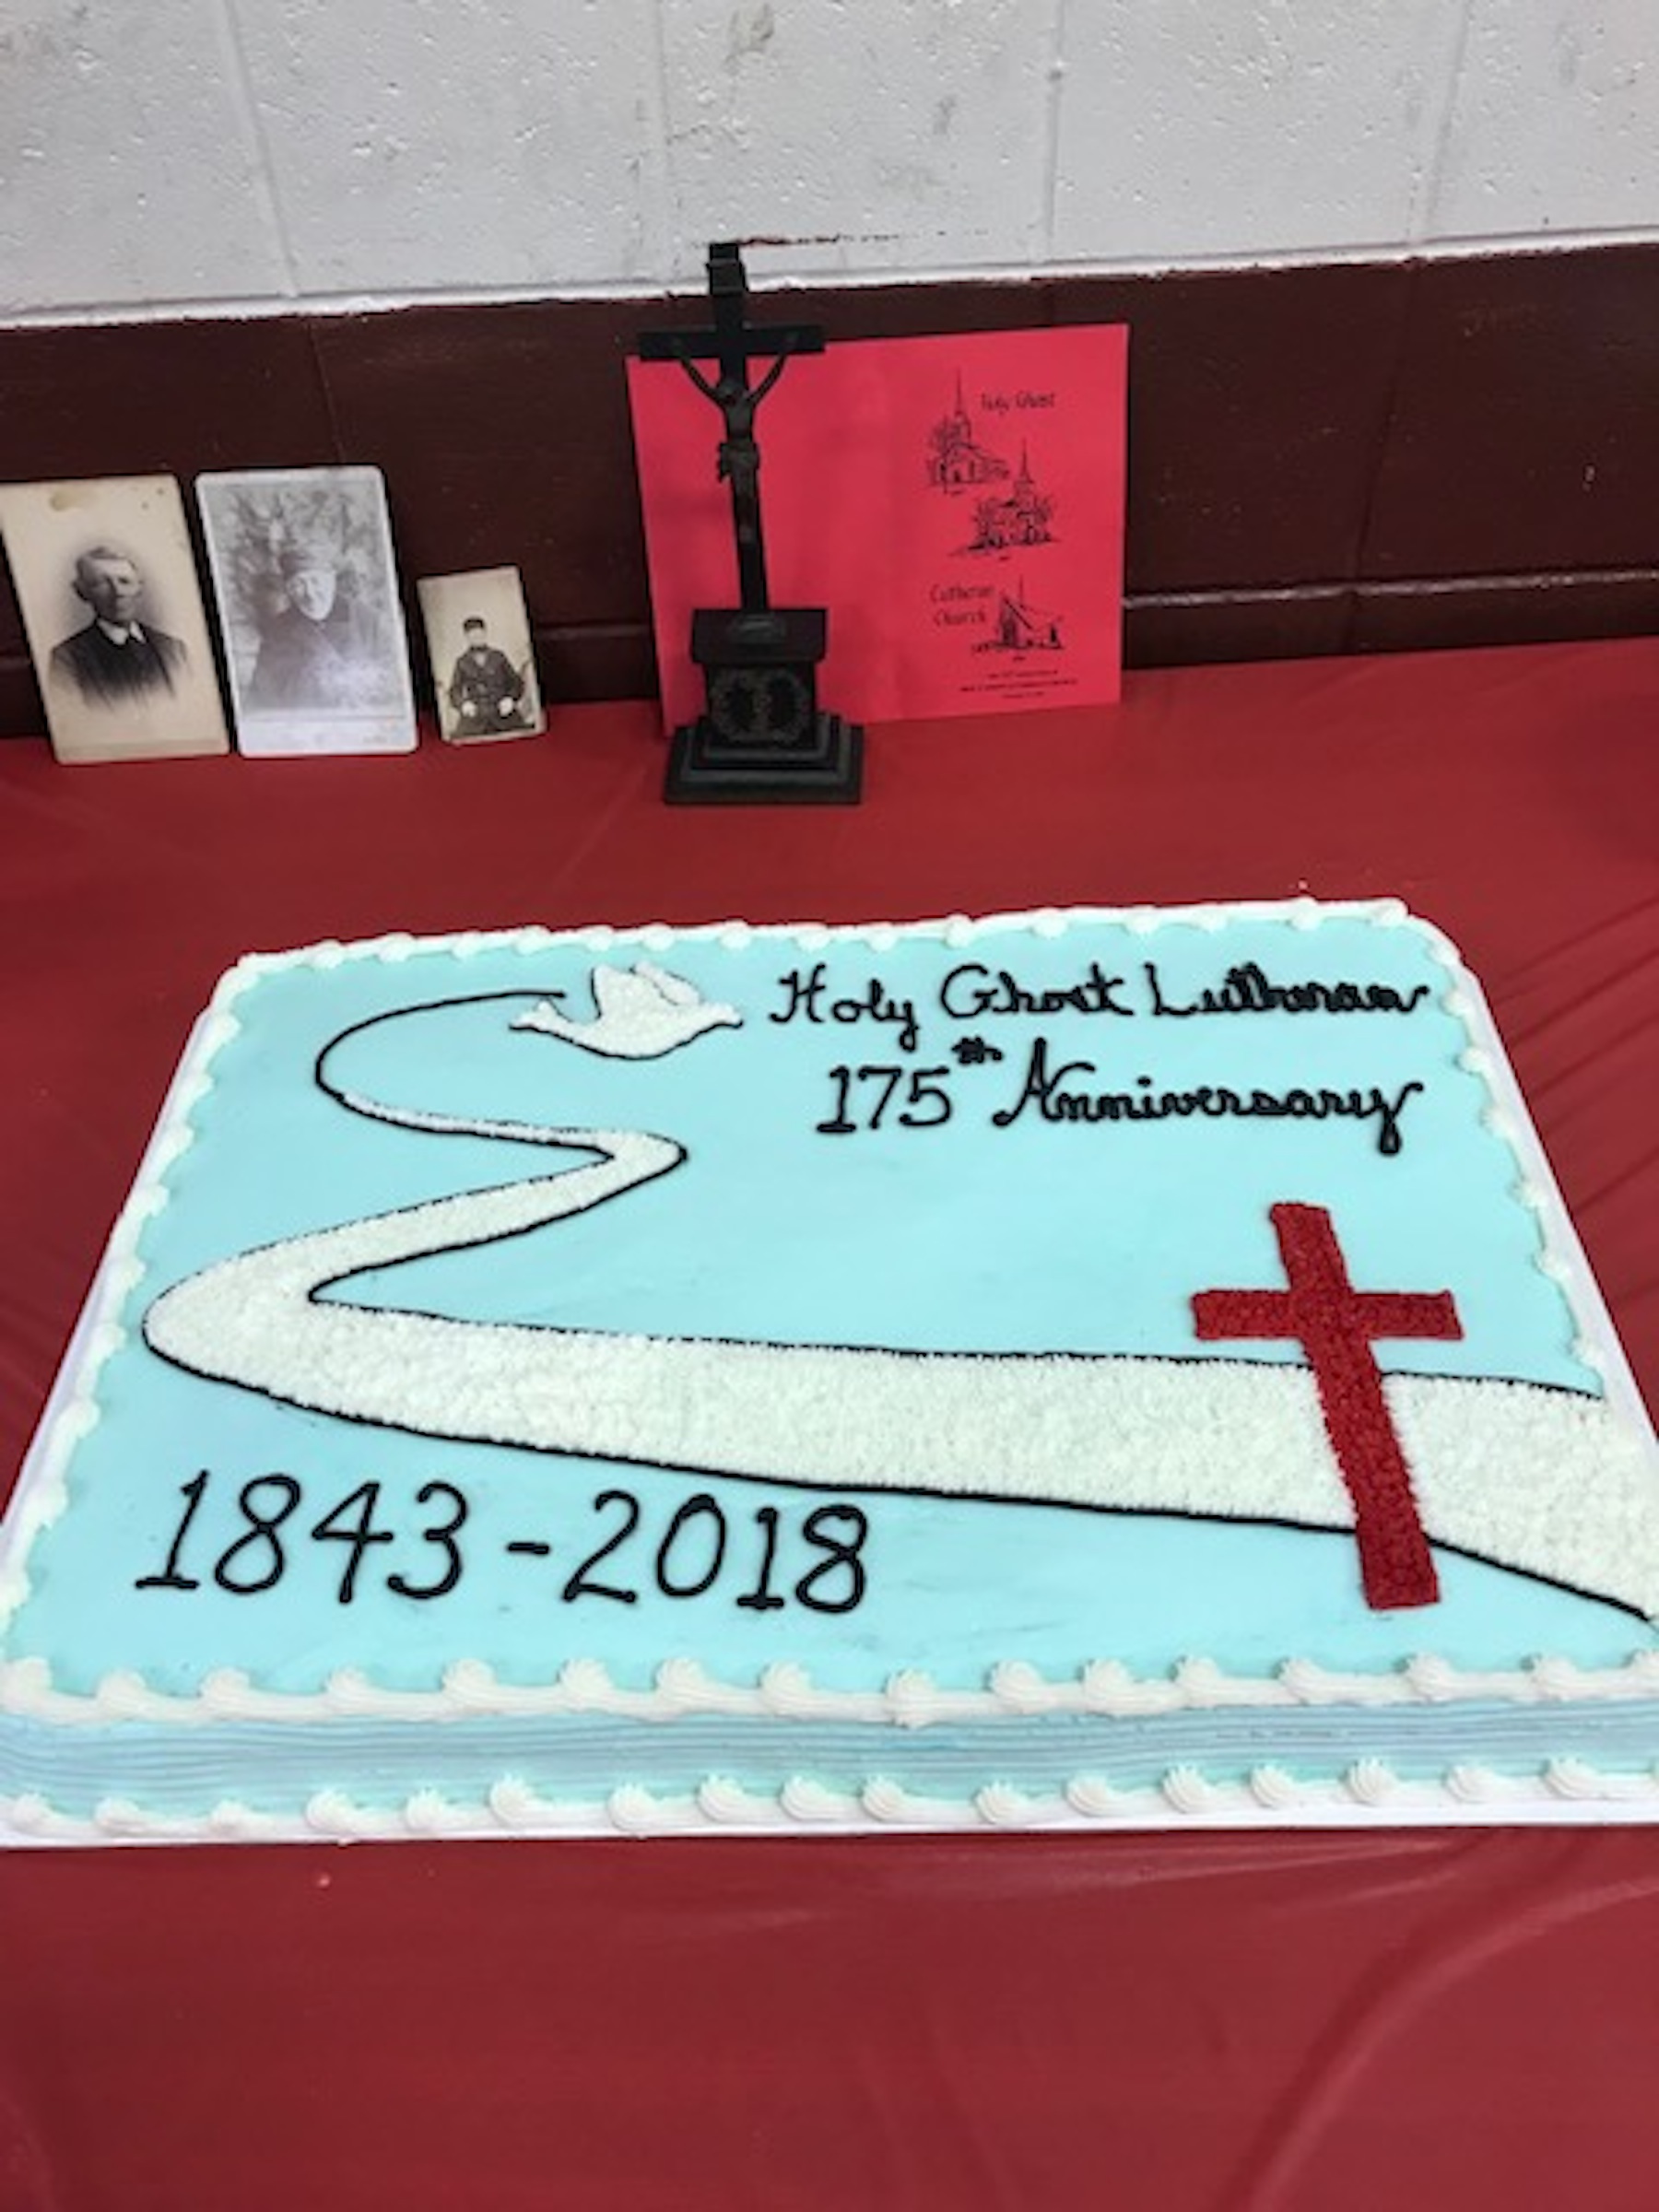 Pictured are scenes from Holy Ghost Lutheran Church's 175th anniversary gathering. (Submitted photos)